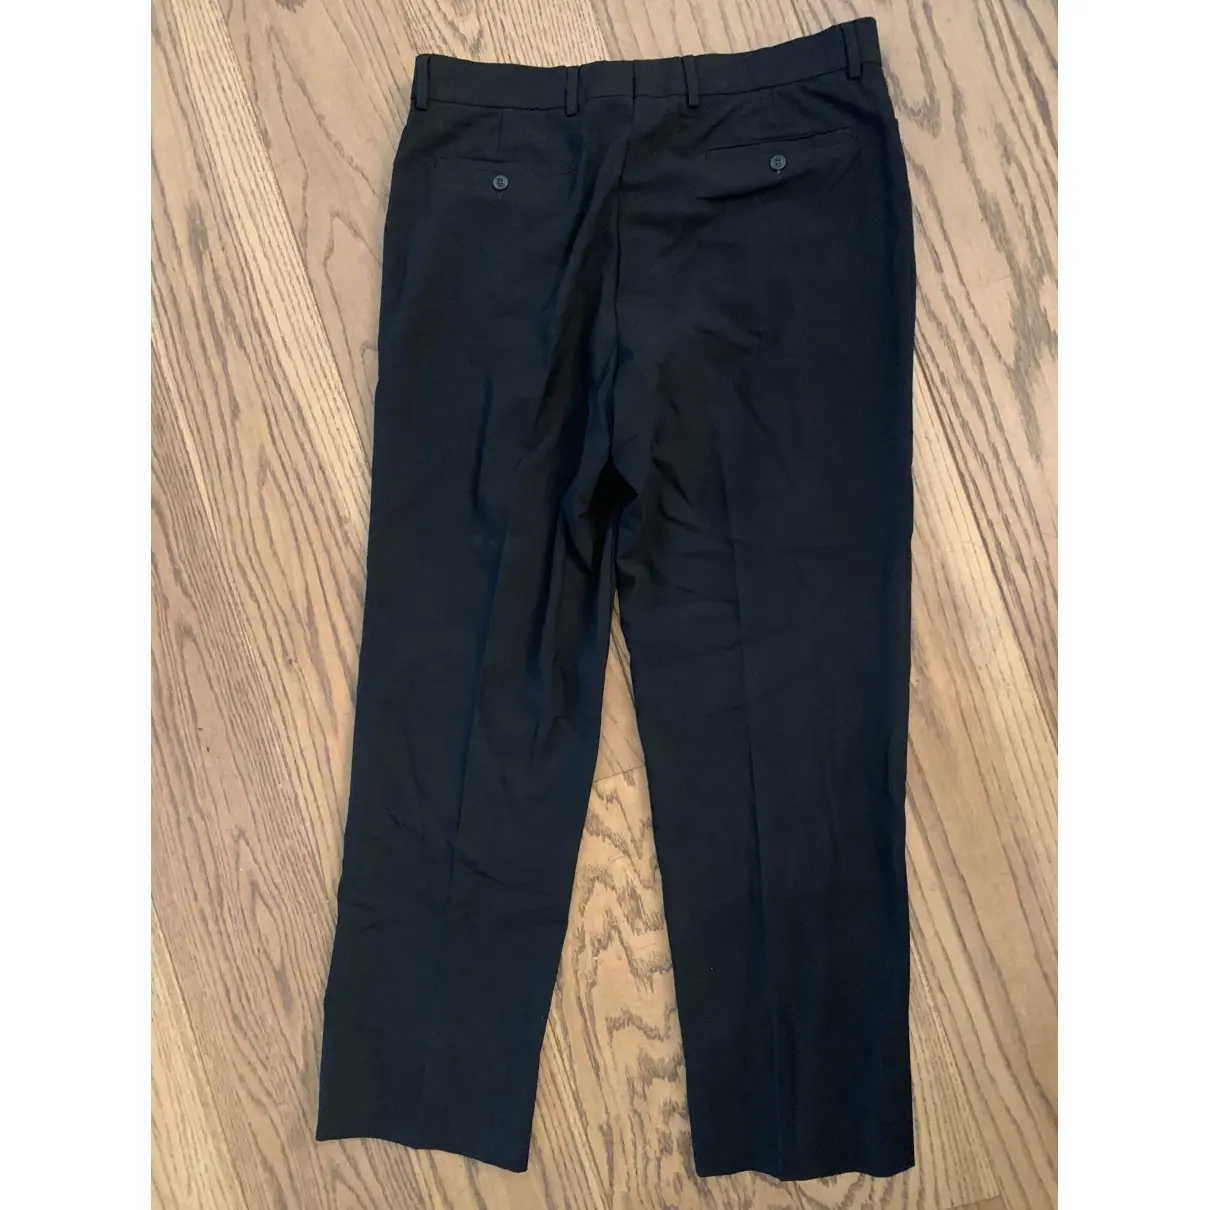 GUESS Trousers for sale